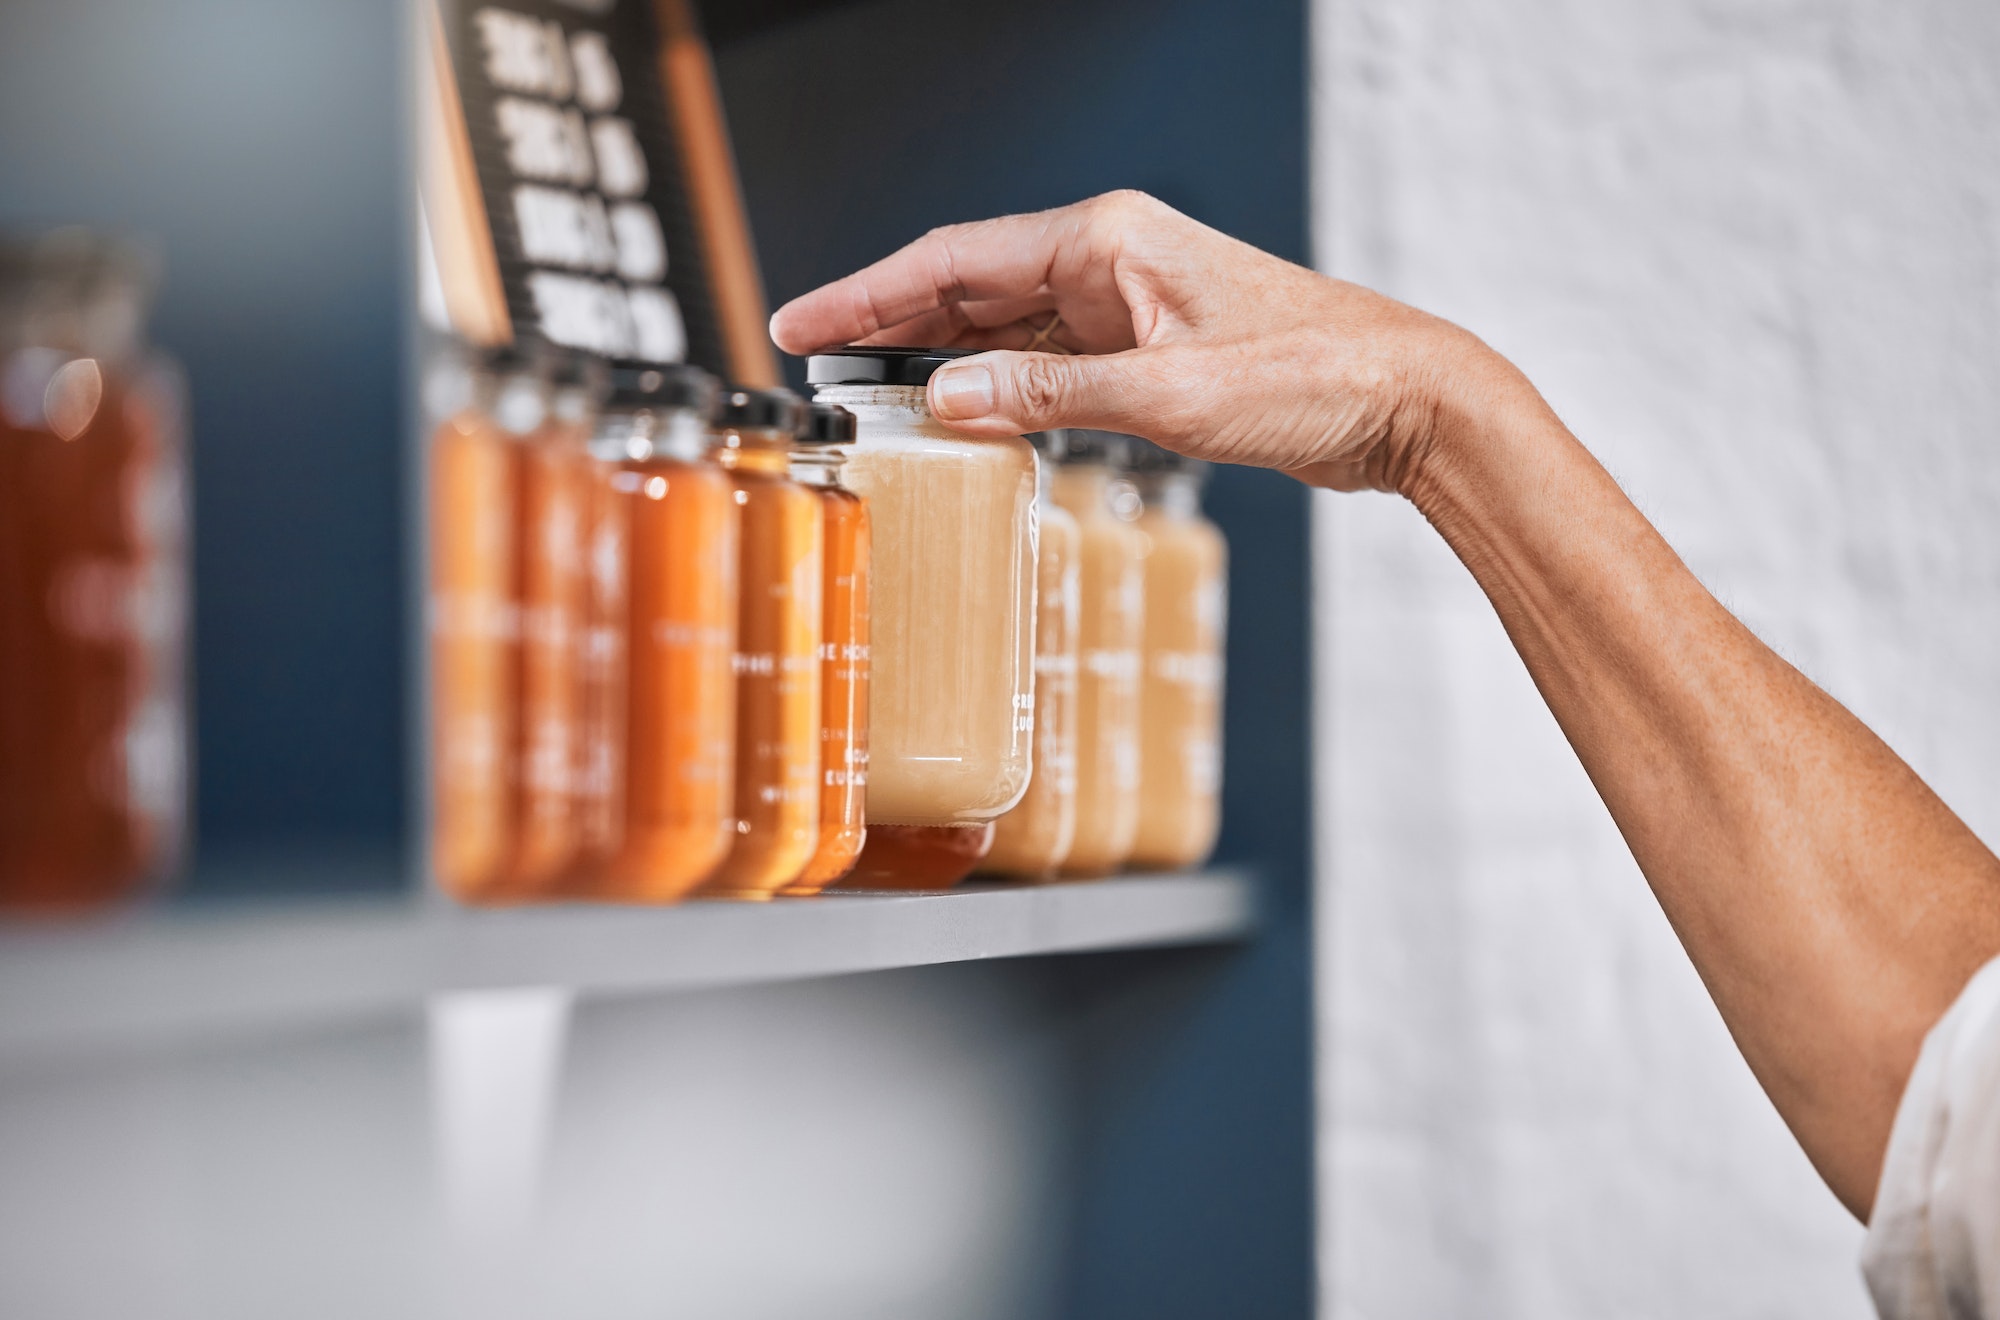 Honey, product and retail with hands of woman for natural, supermarket and grocery shopping shelf.